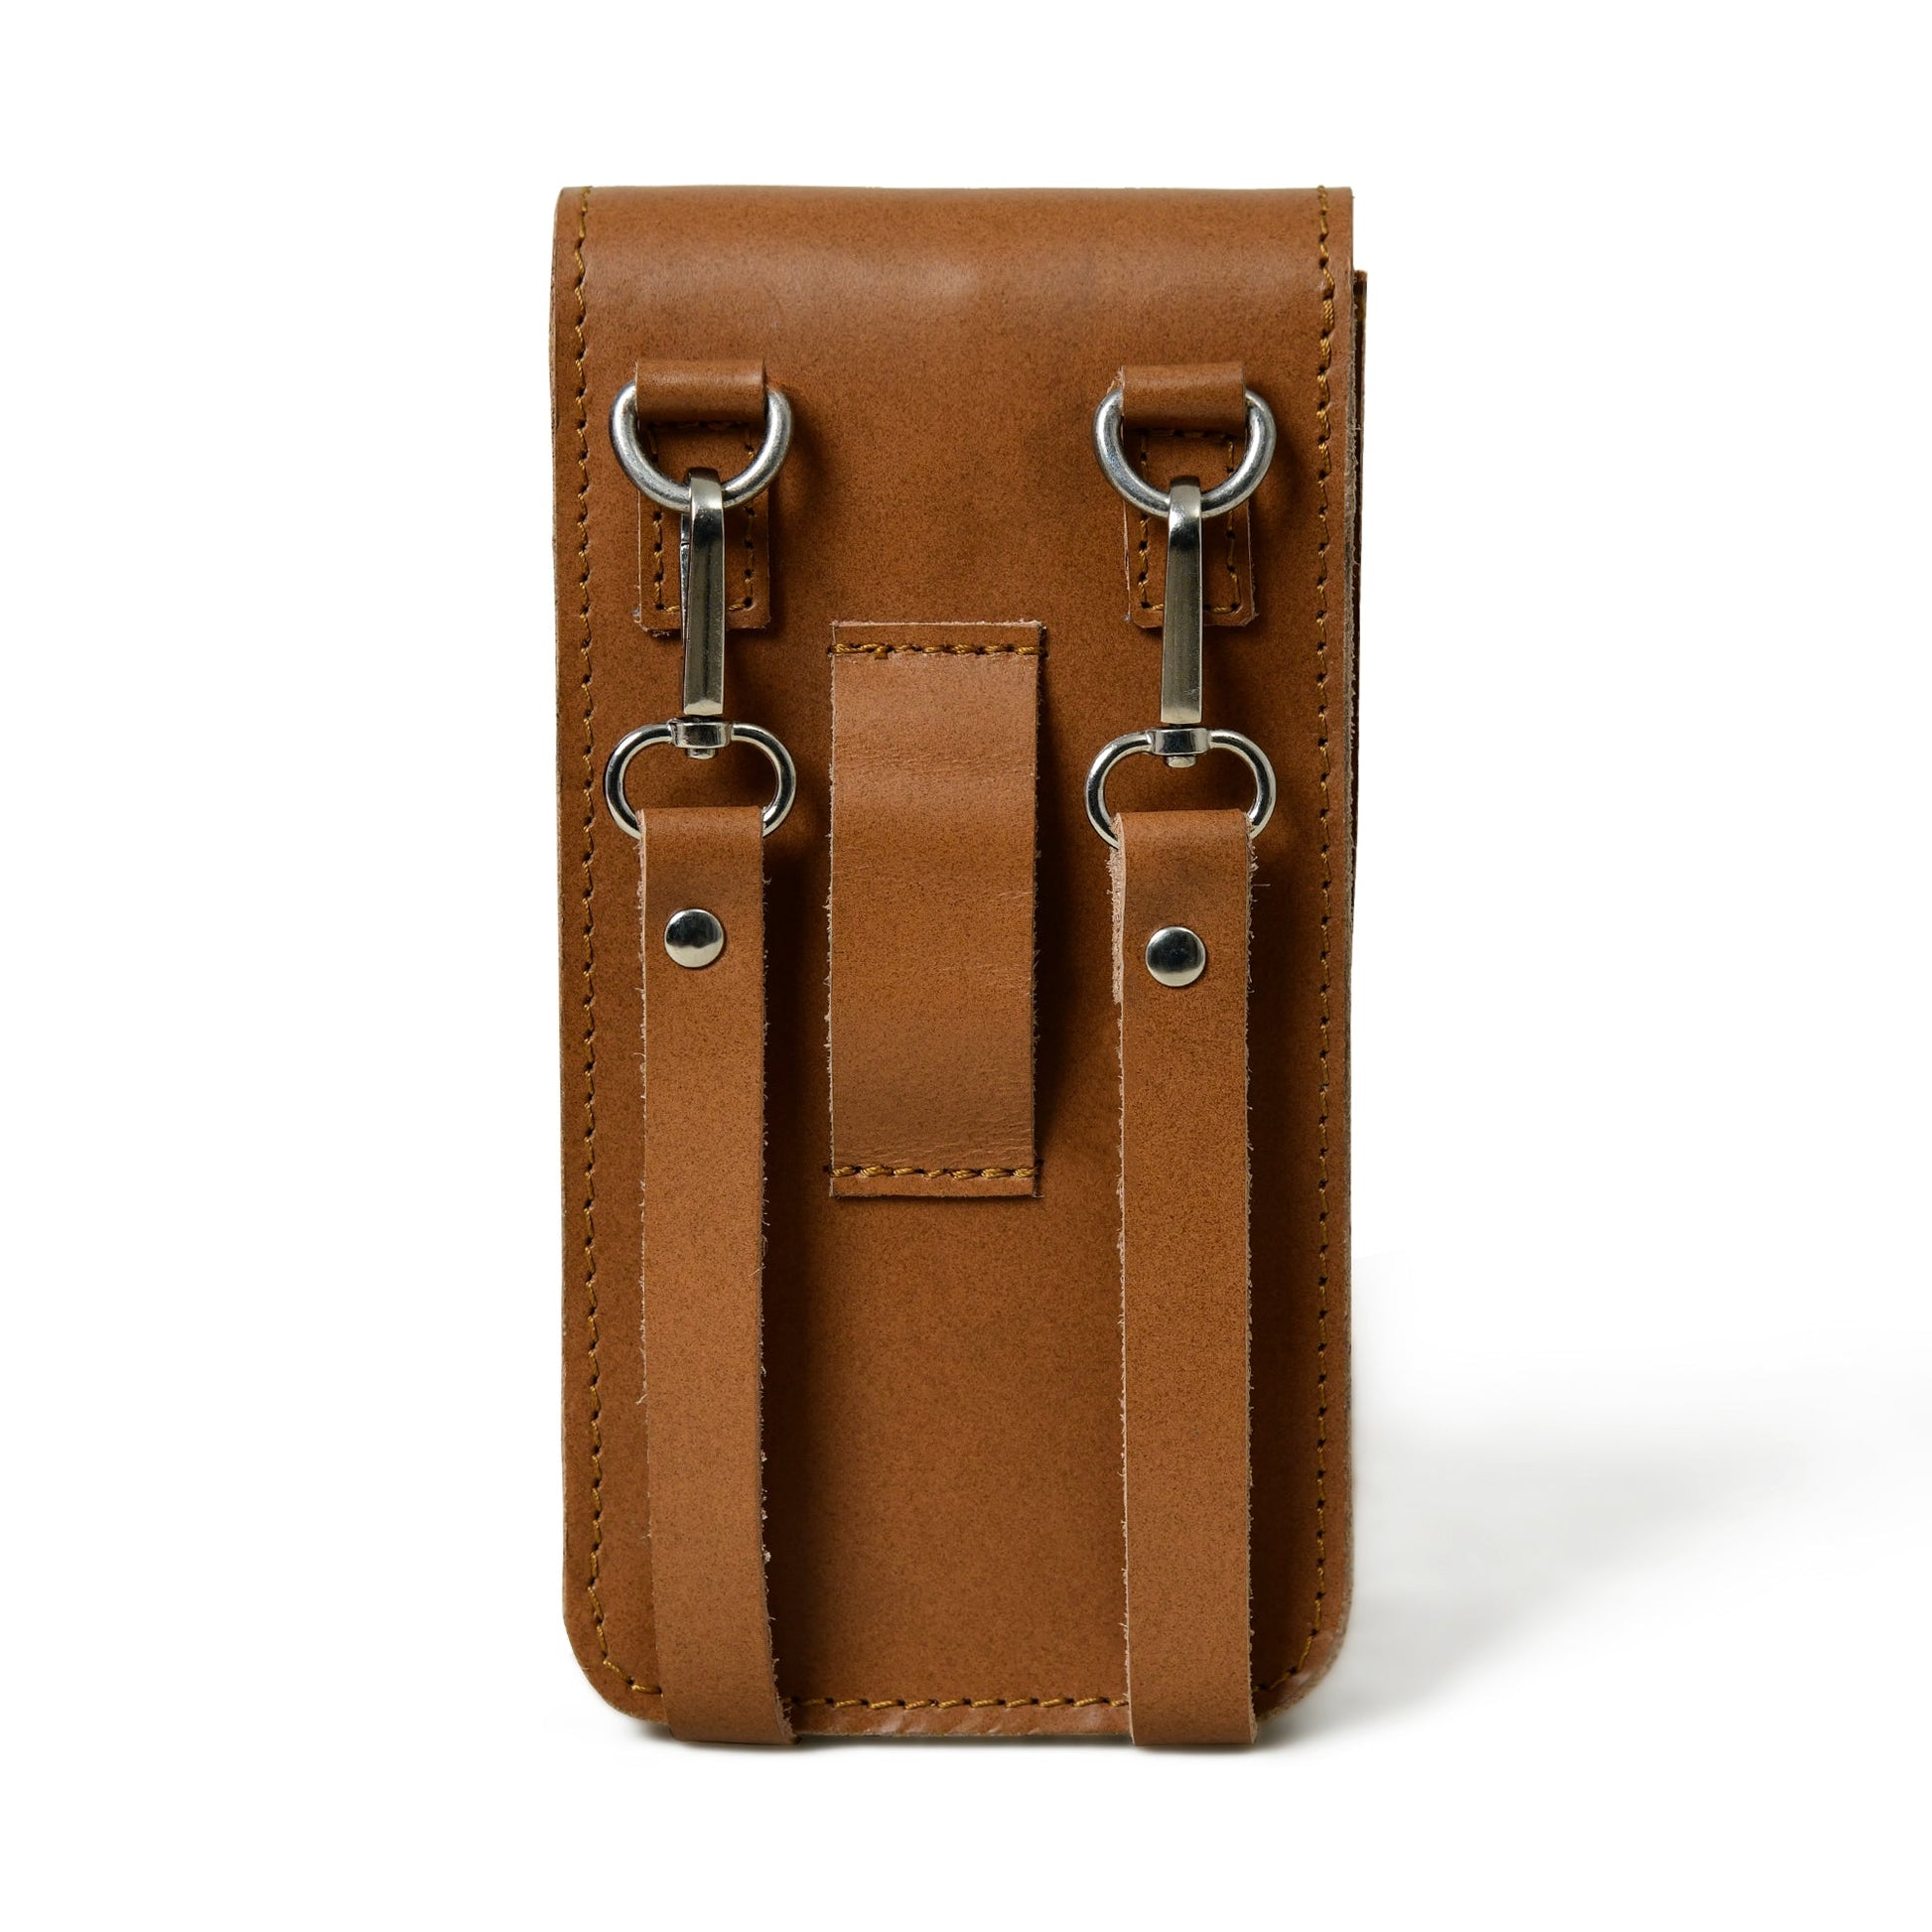 Cocoa Brown Mobile Case With Strap - The Tool Store